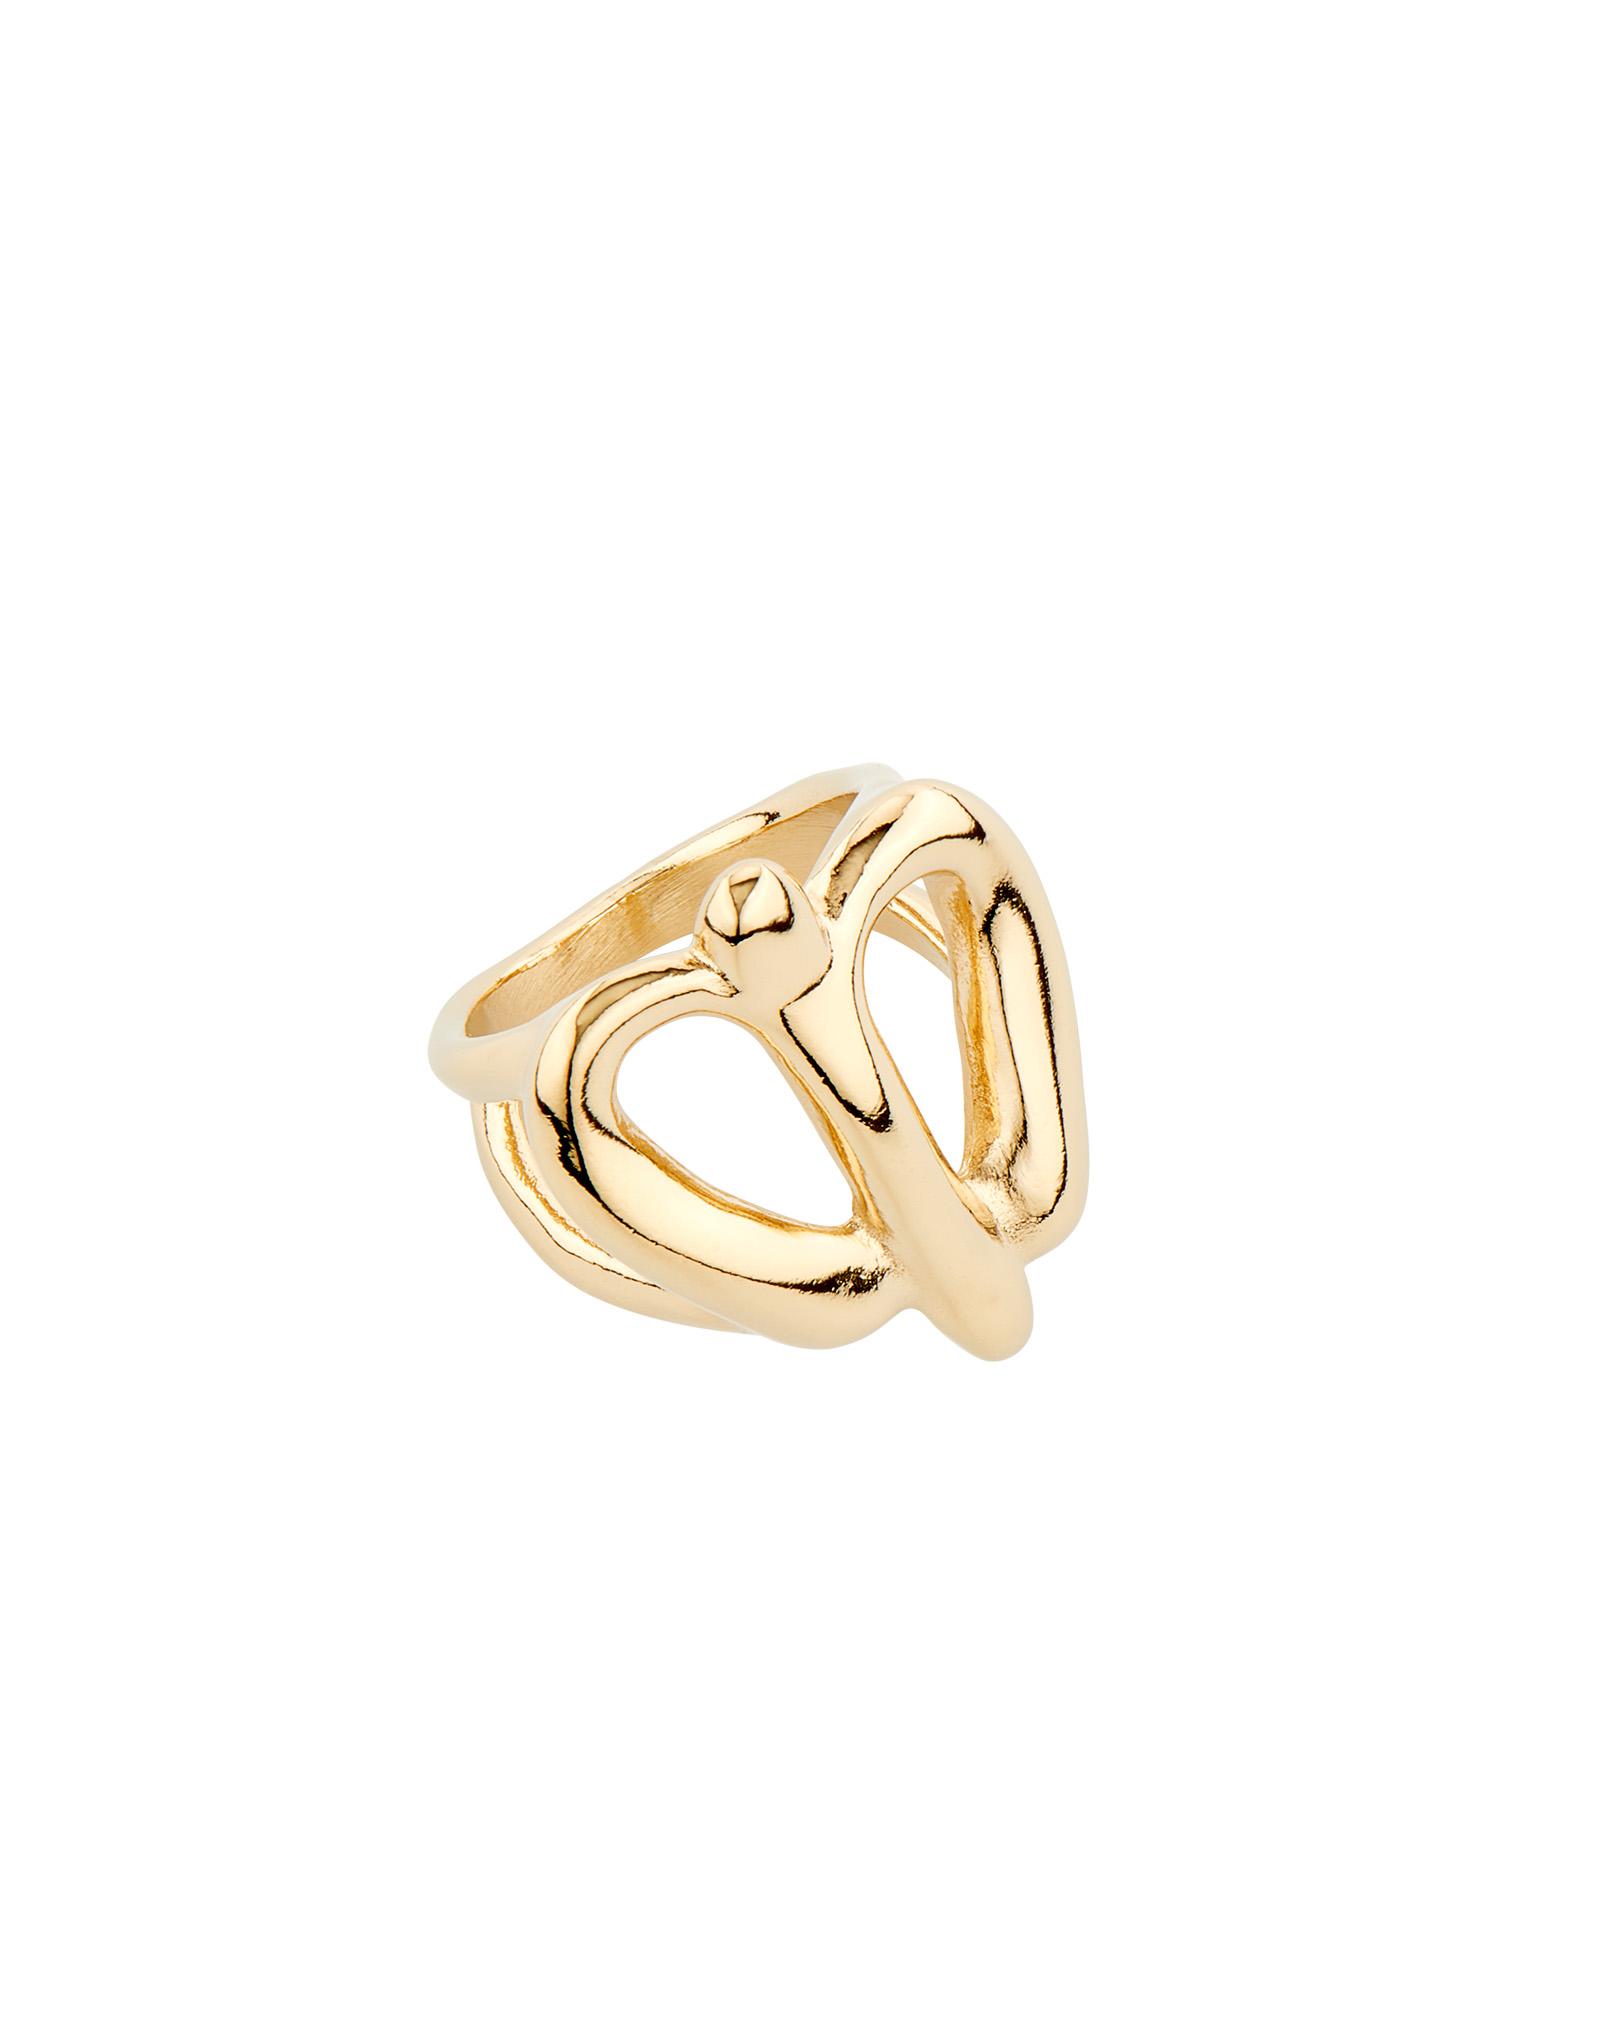 FLY BABY FLY Ring, Golden, large image number null